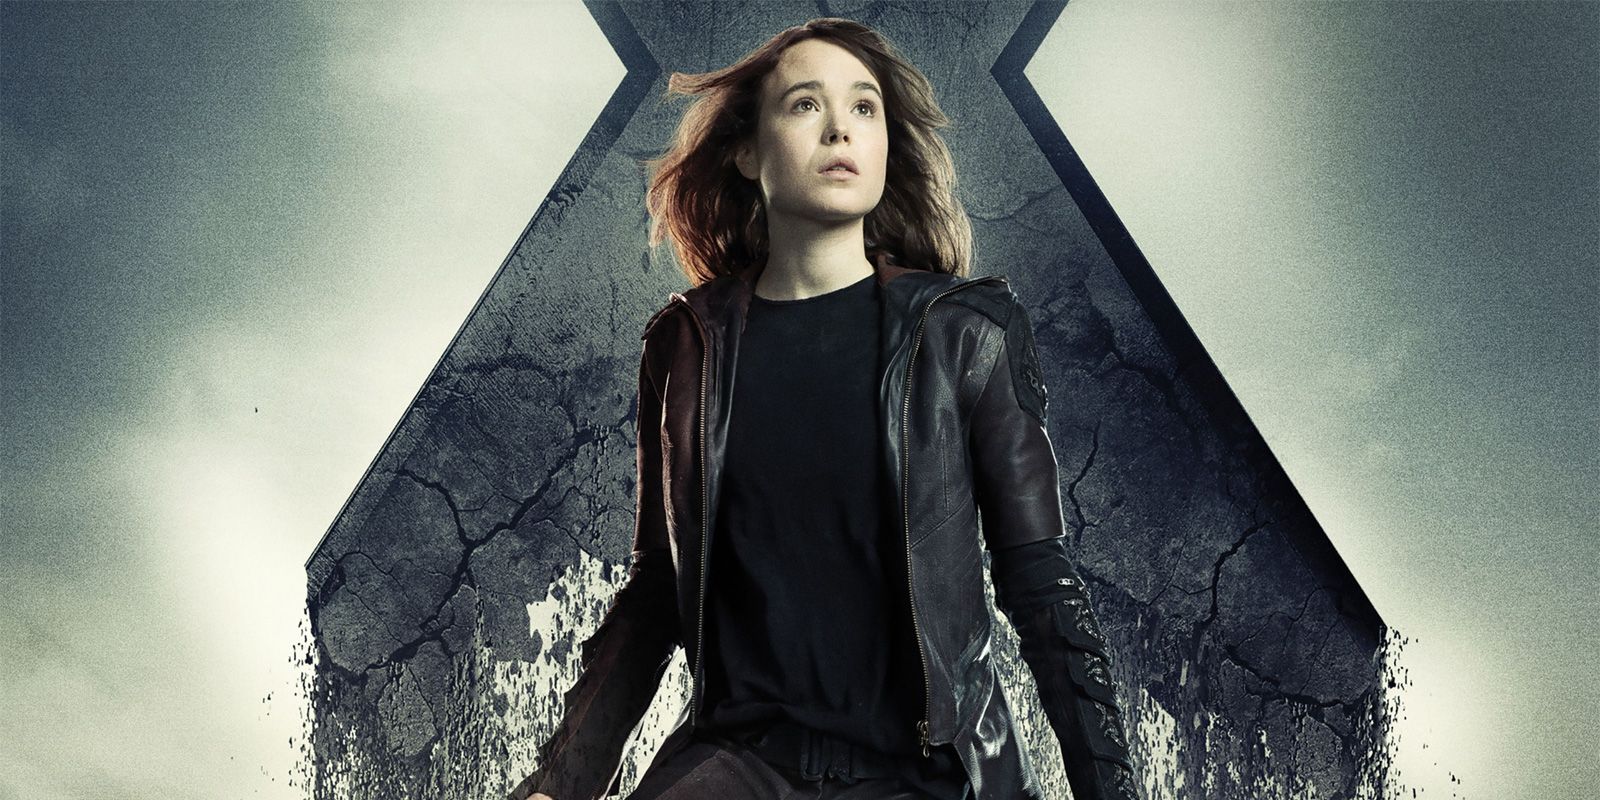 Ellen Page as Kitty Pryde in X-Men: Days of Future Past